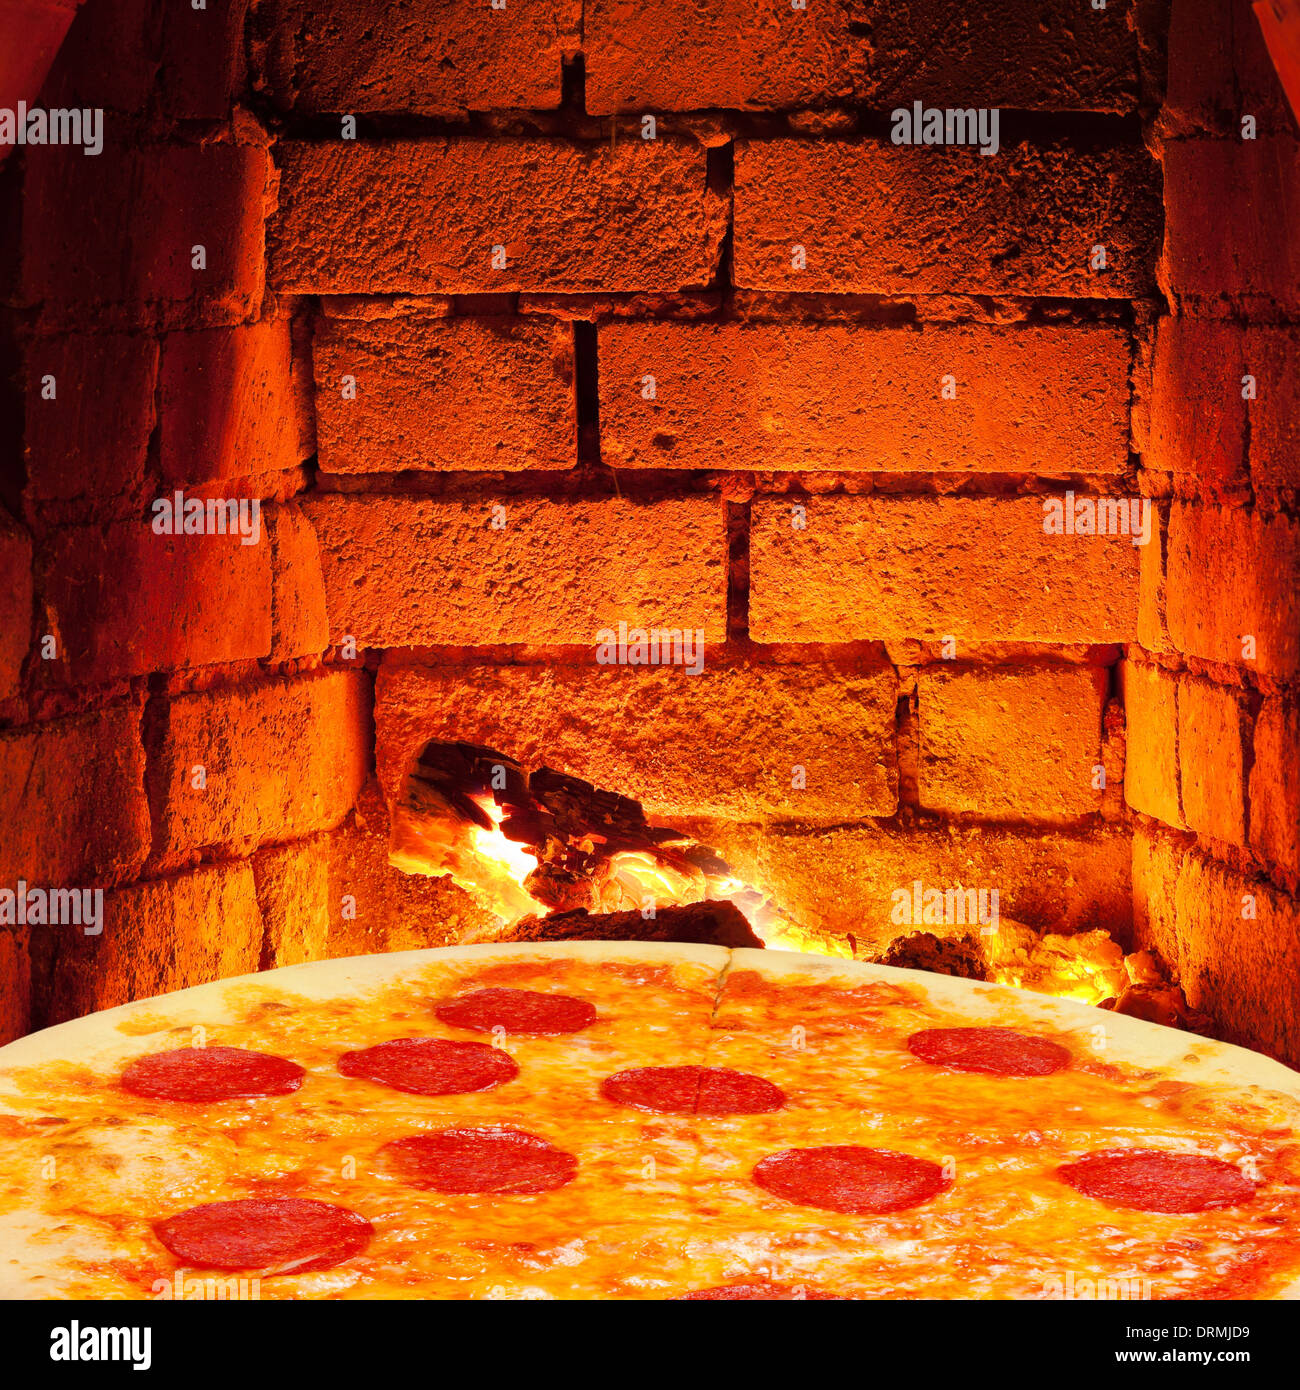 italian pizza with salami and hot brick wall of wood burning oven Stock Photo